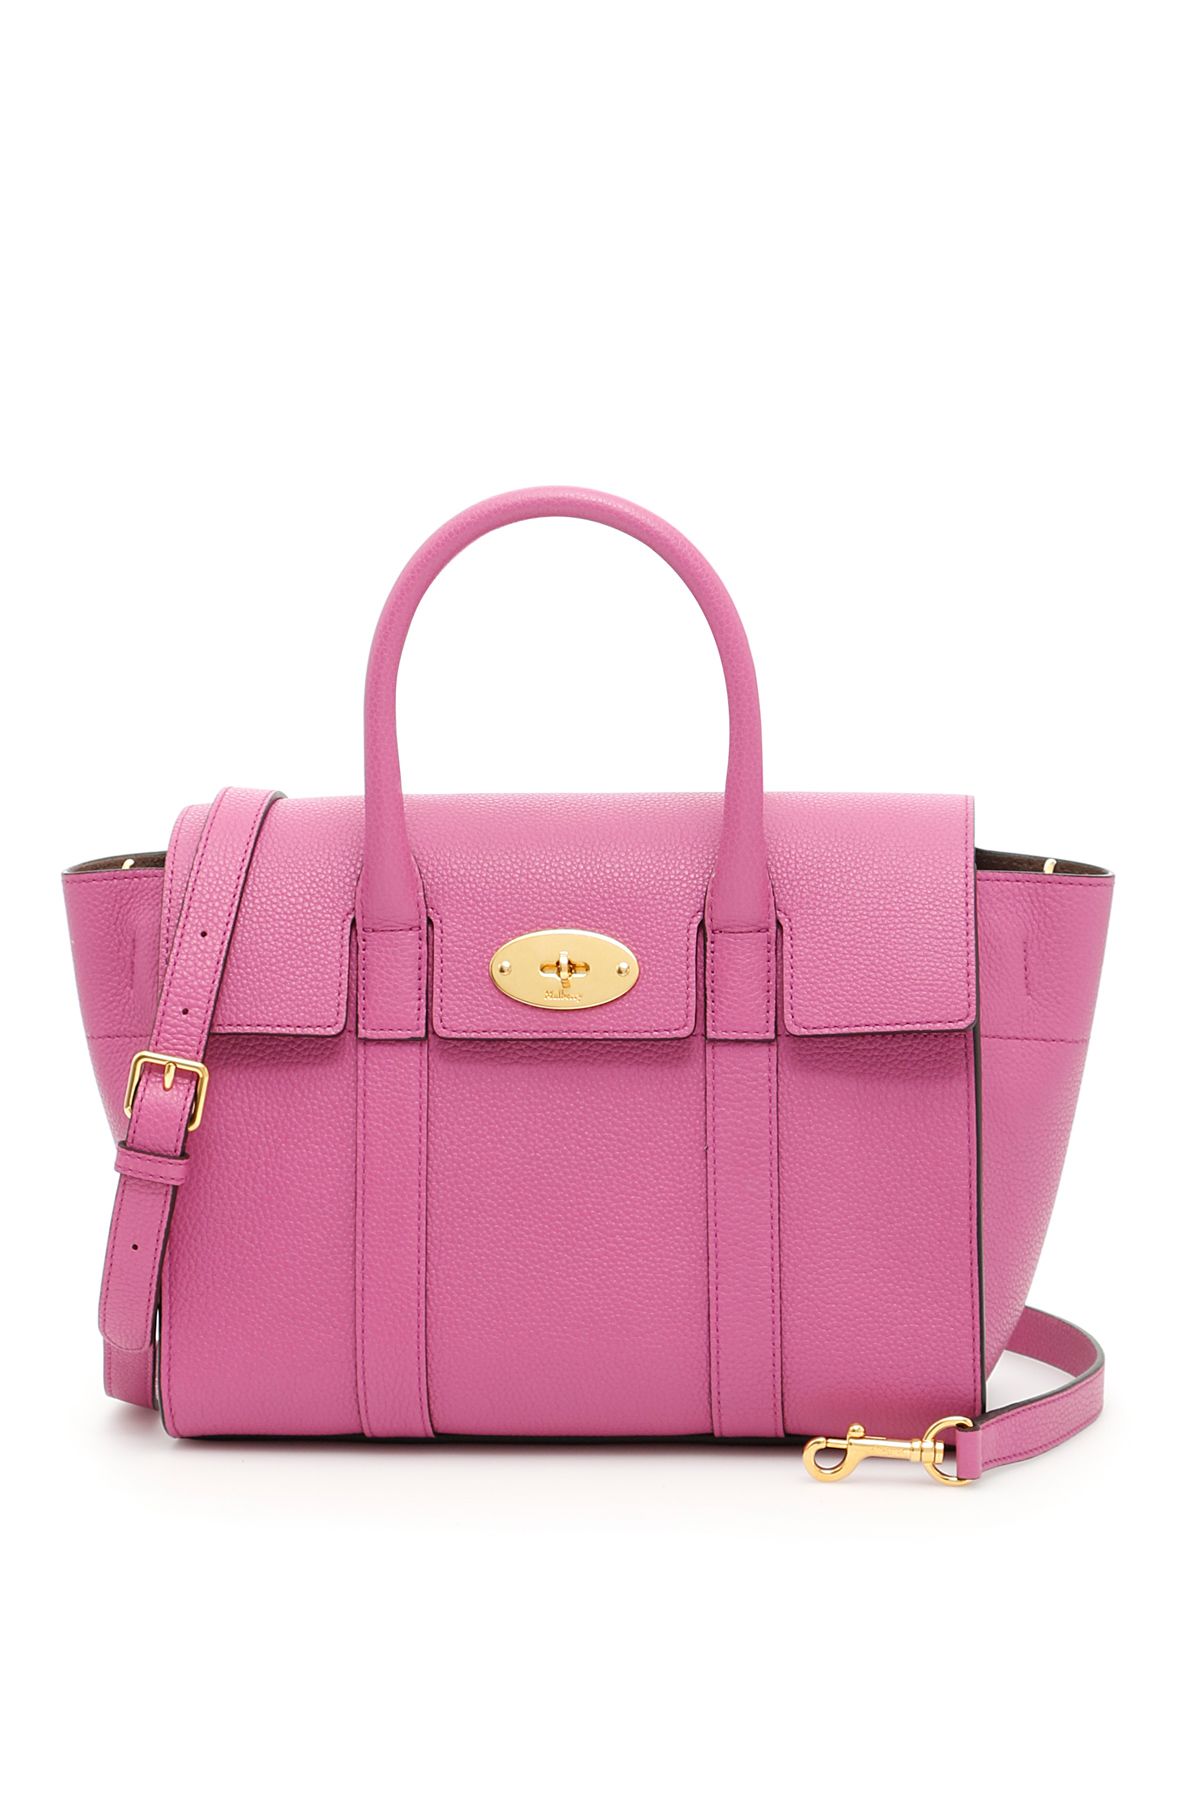 Mulberry Small Bayswater Bag, Orchidrosa | ModeSens